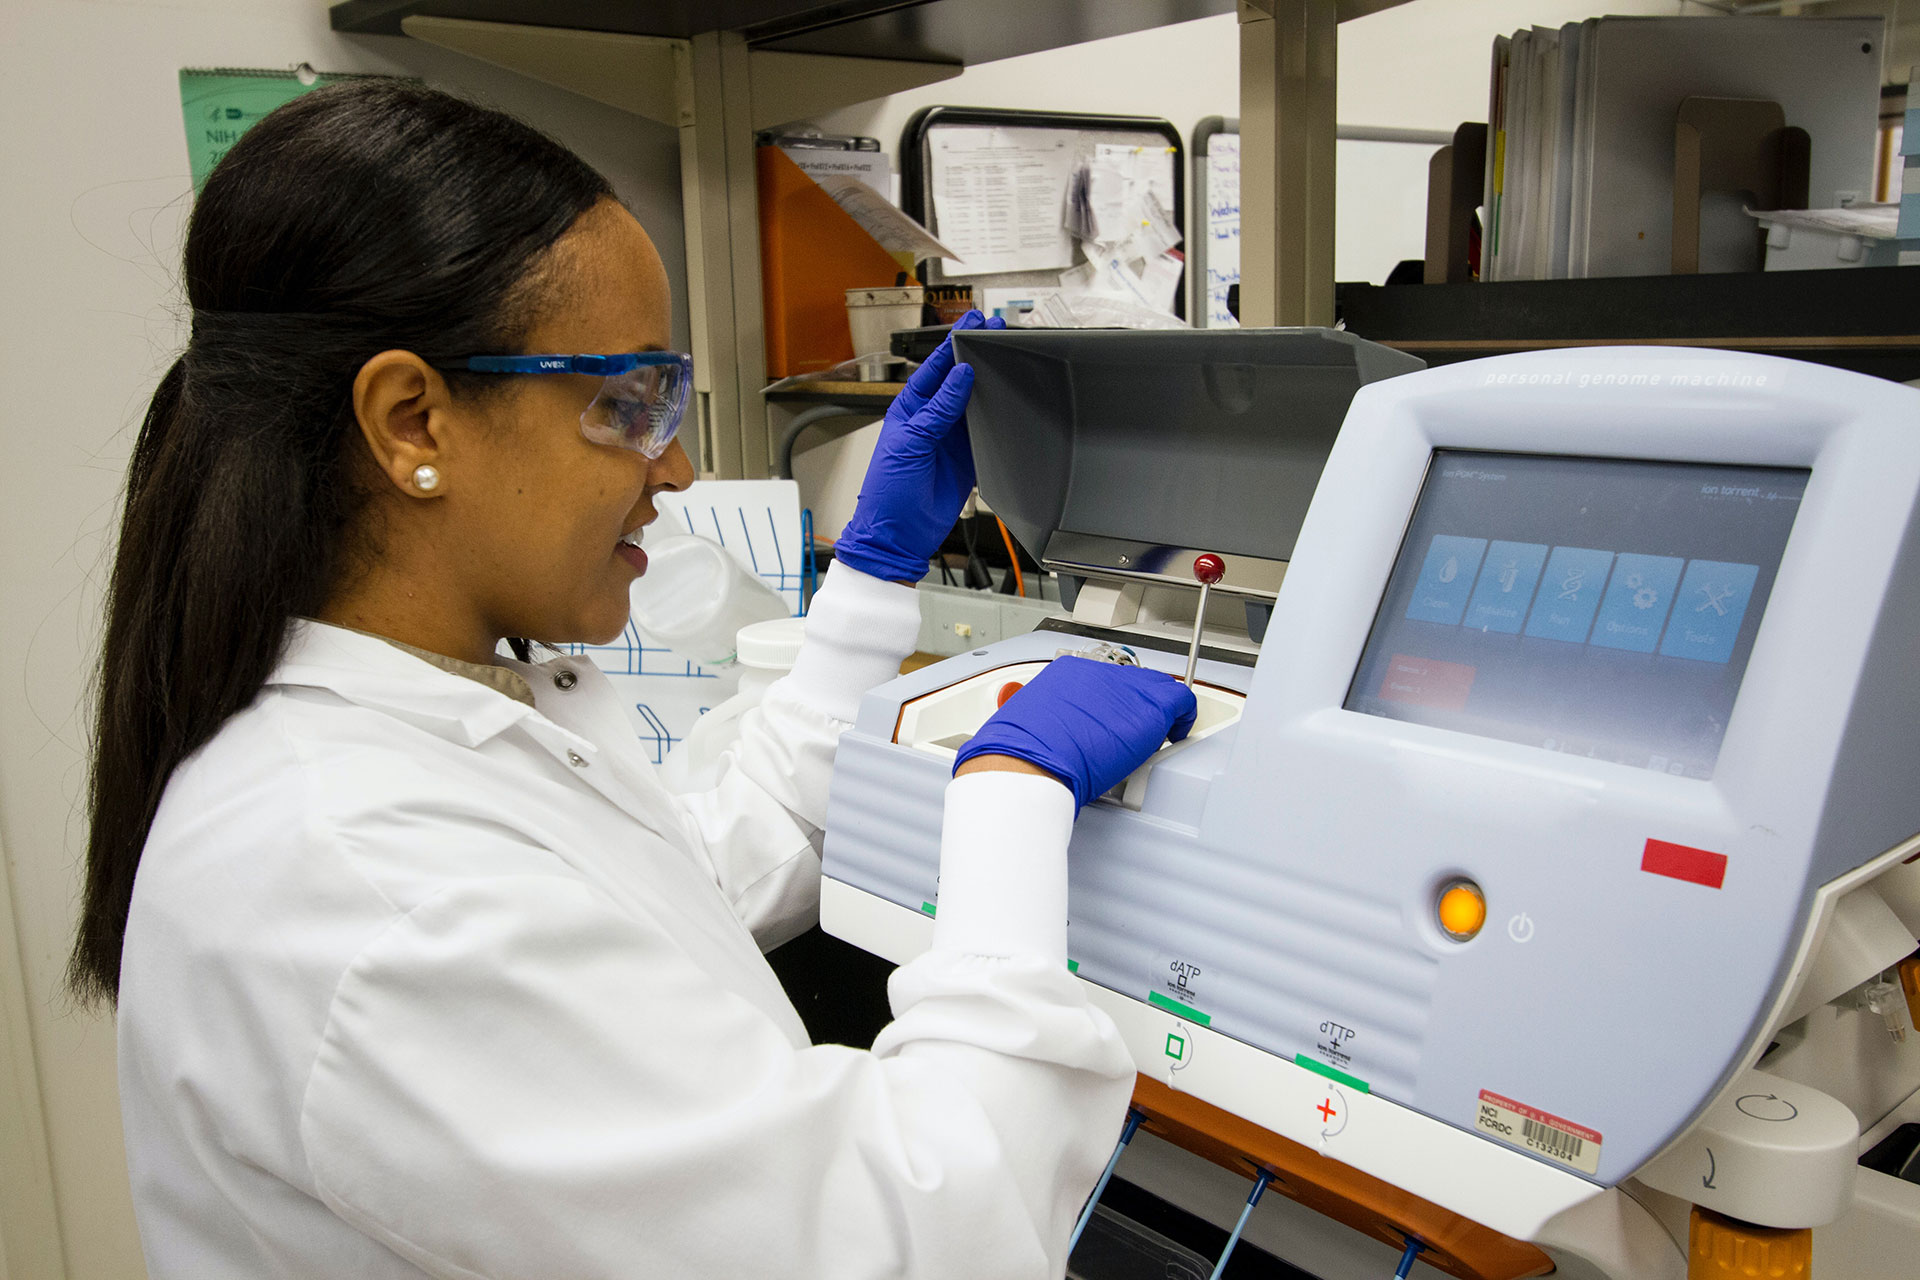 Female scientist happily working with lab equipment